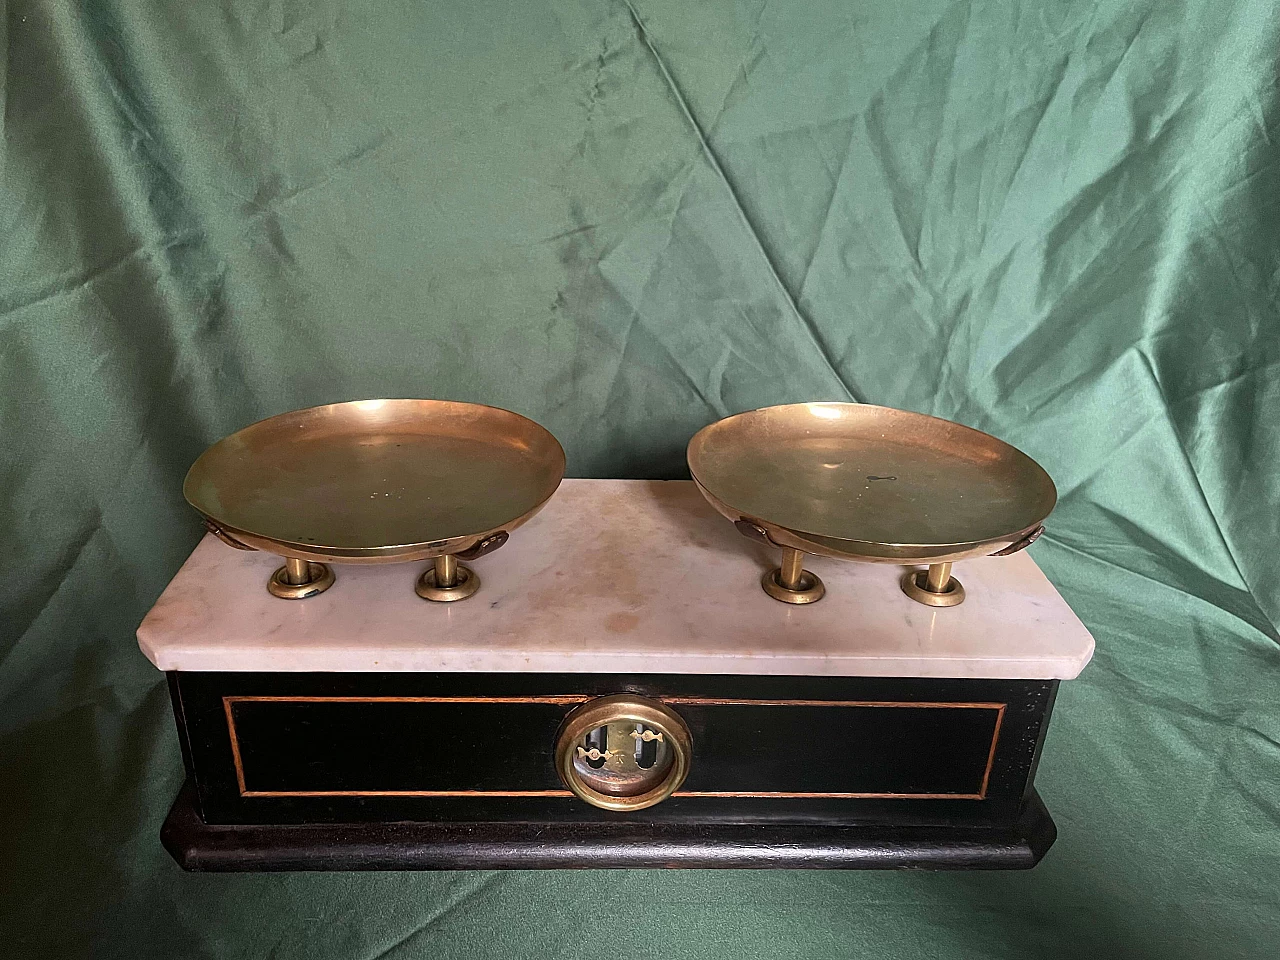 Two-plate scales made of brass, wood and marble, 1920s 2